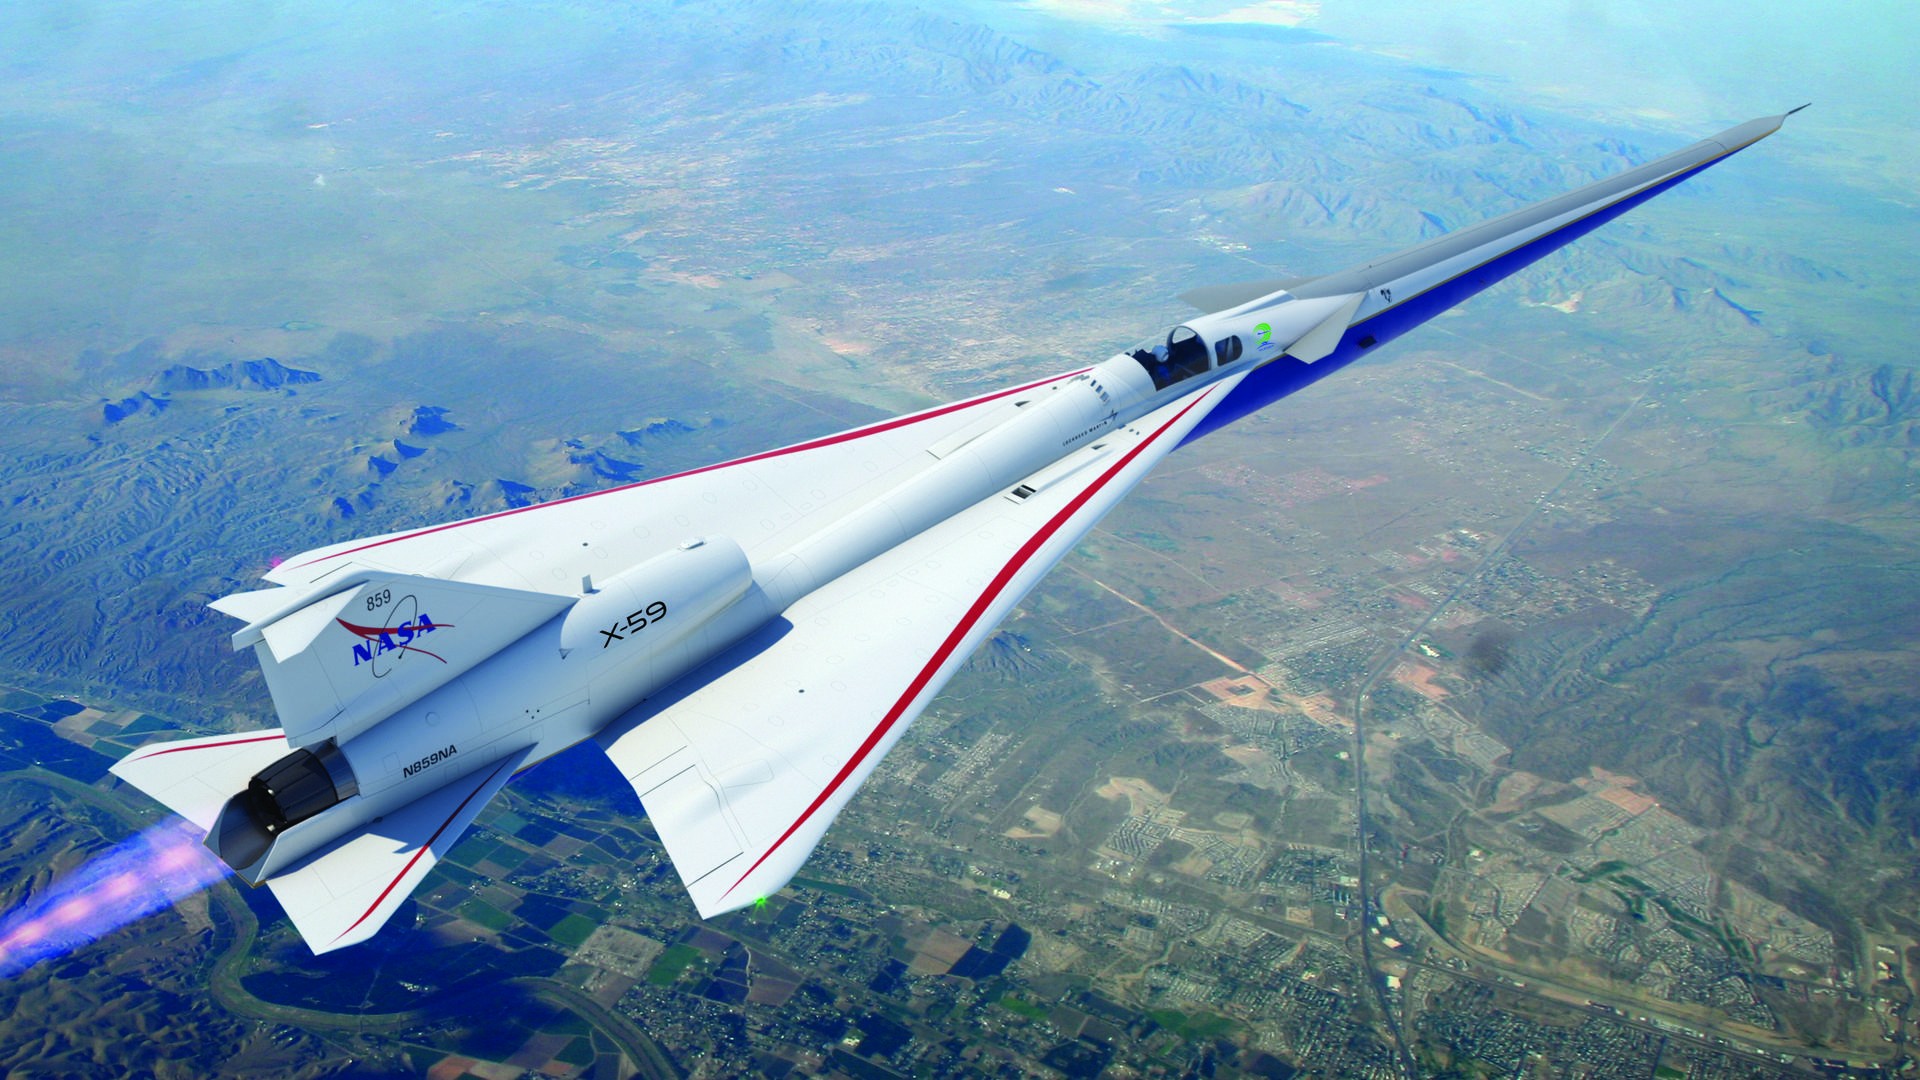 NASA’s X-59 ‘quiet’ supersonic jet heads for a new red, white and blue paint job Space